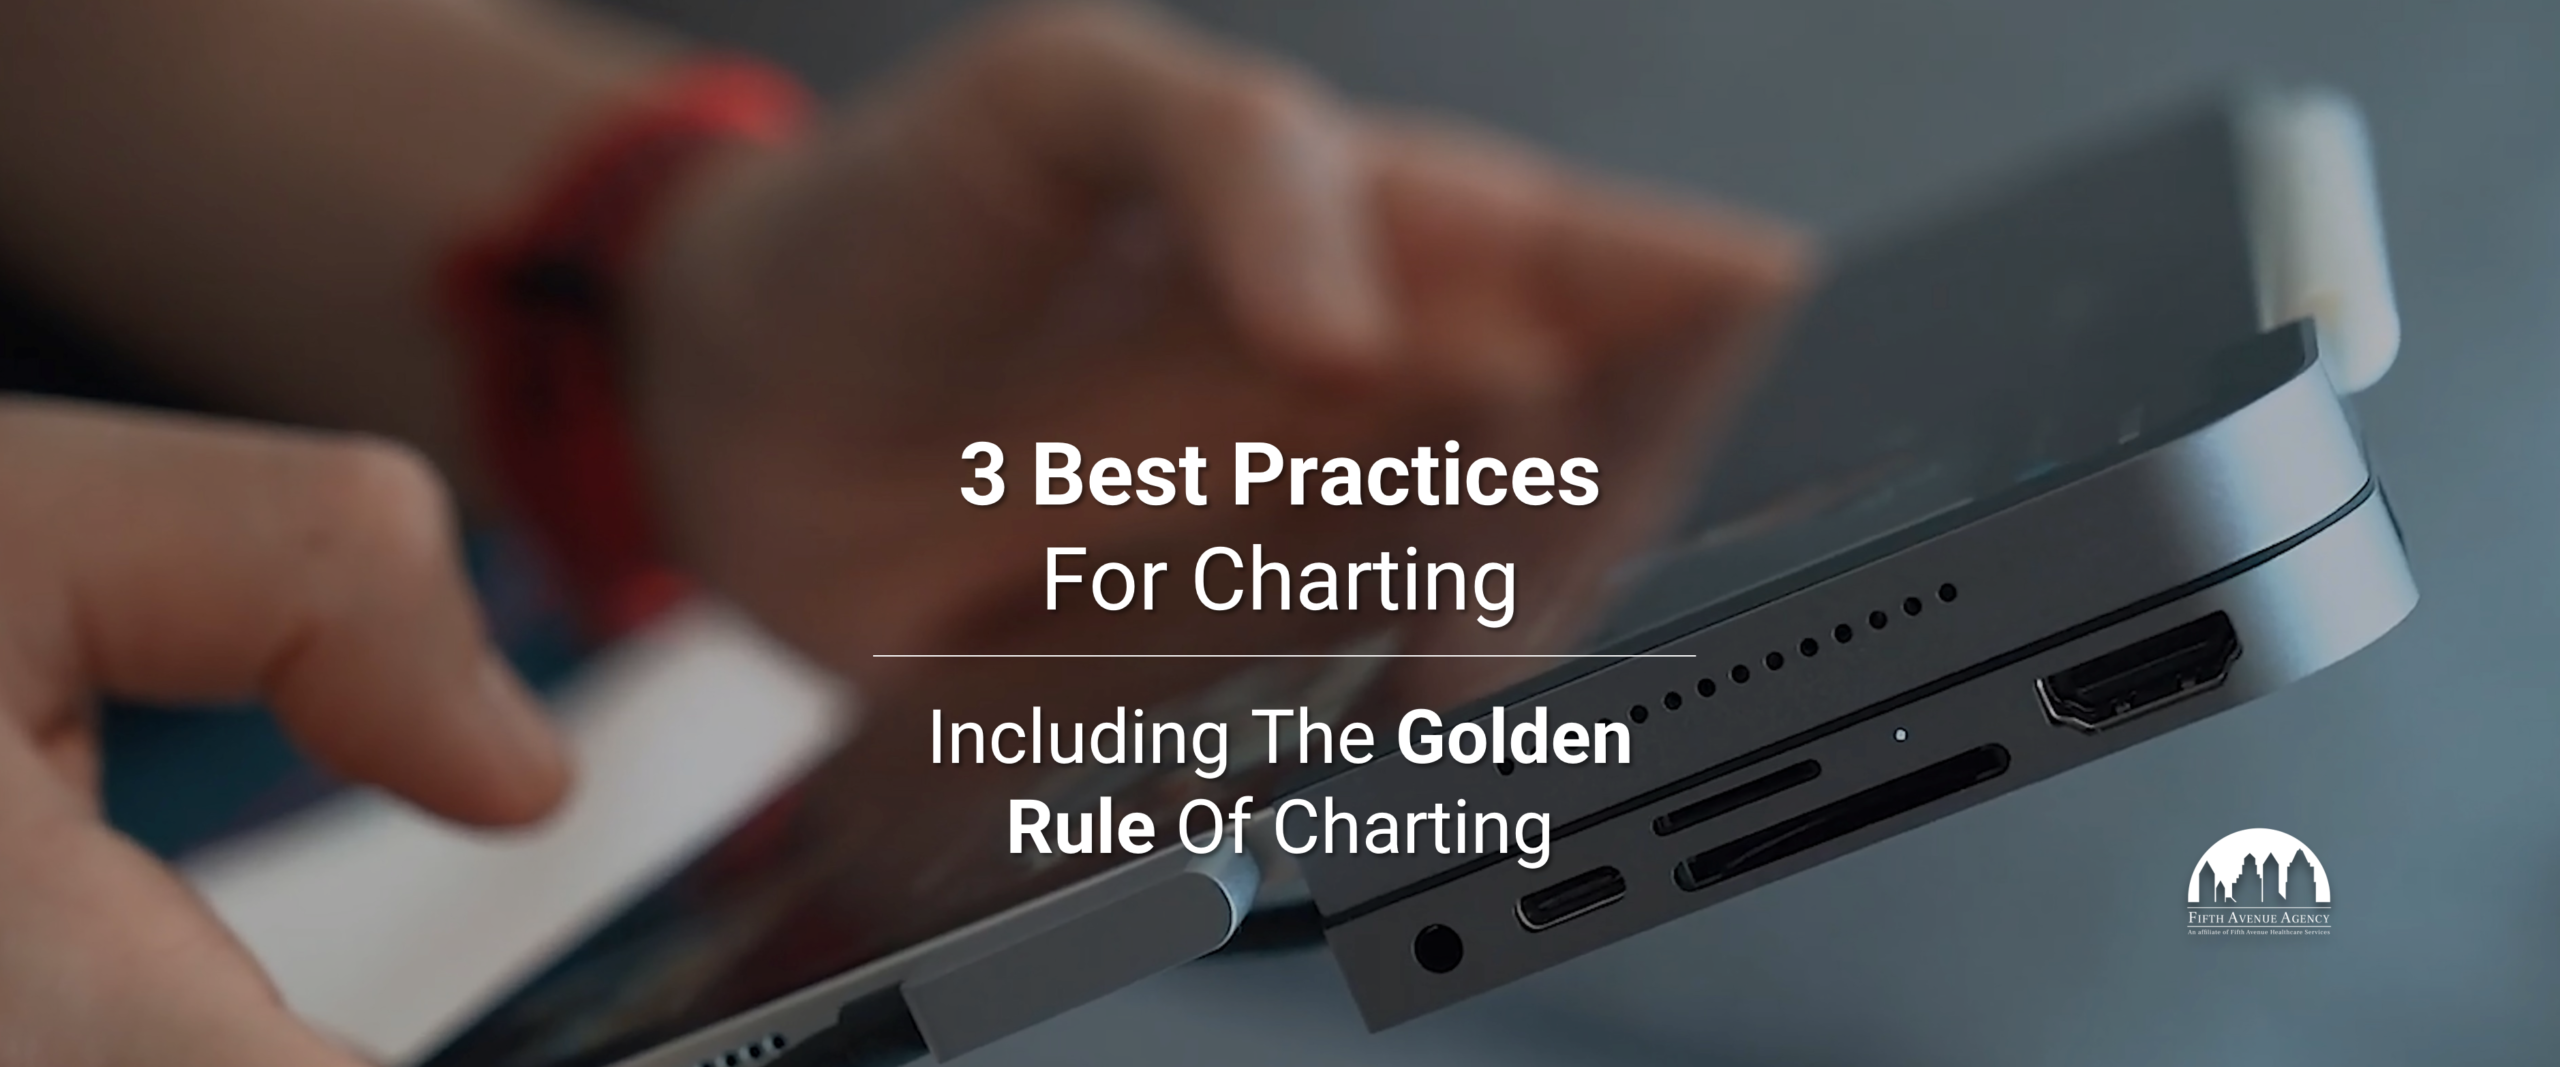 3 Best Practices For Charting